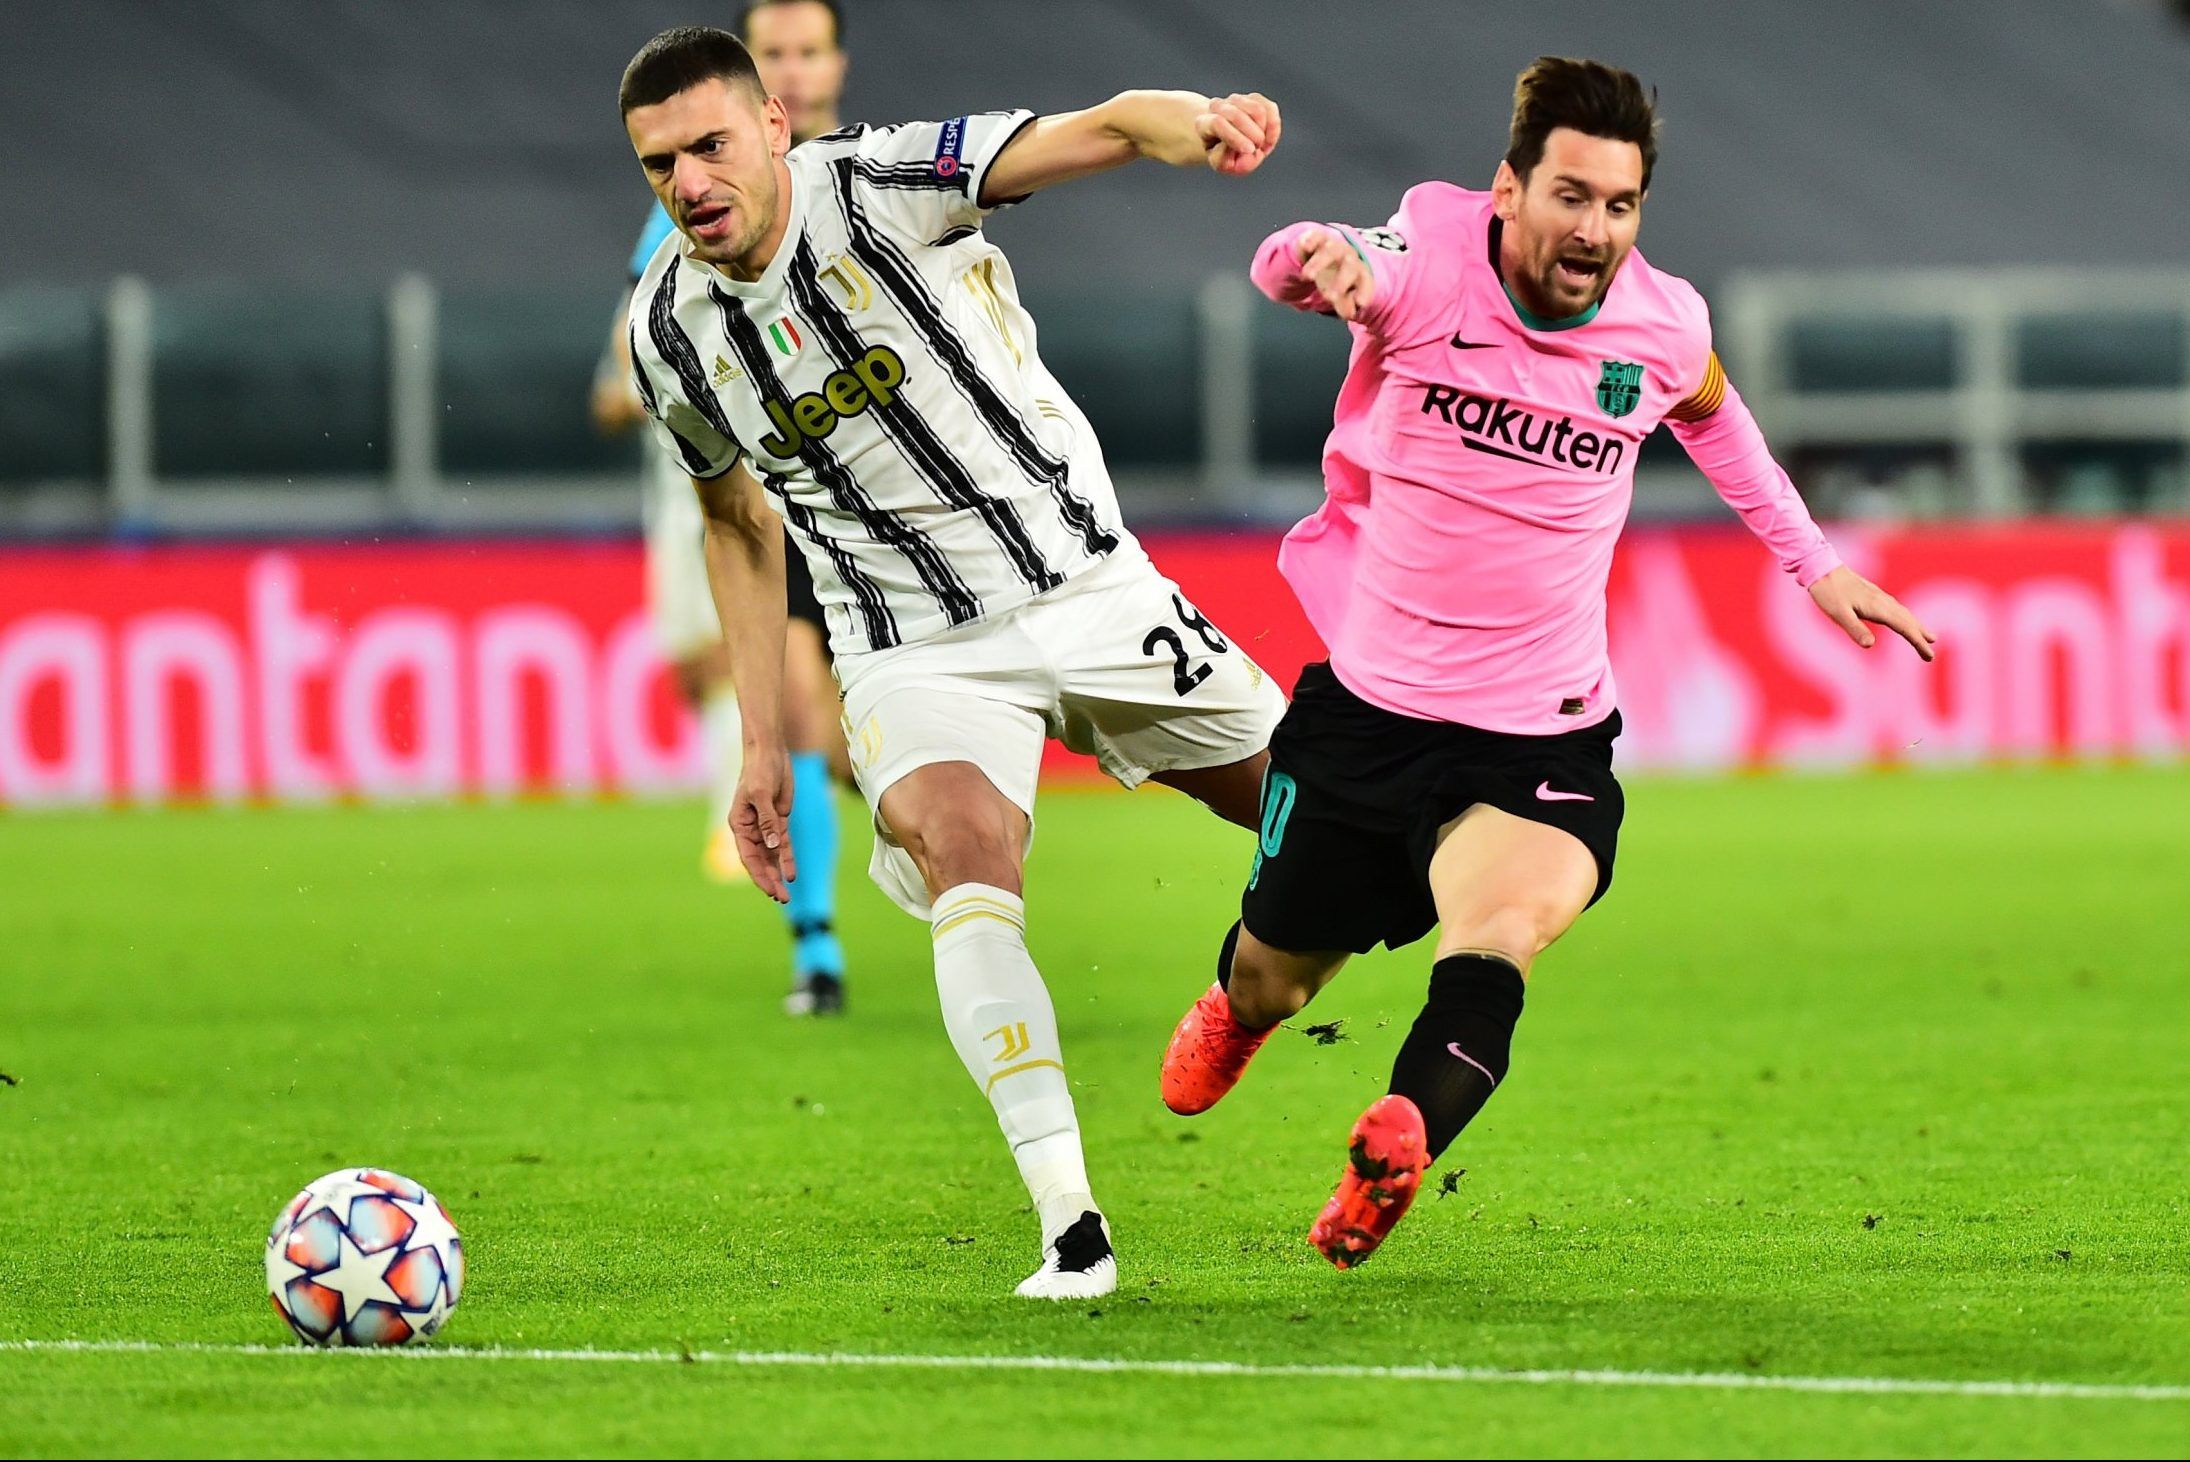 juventus defender merih demiral tackles barcelona star lionel messi in the champions league